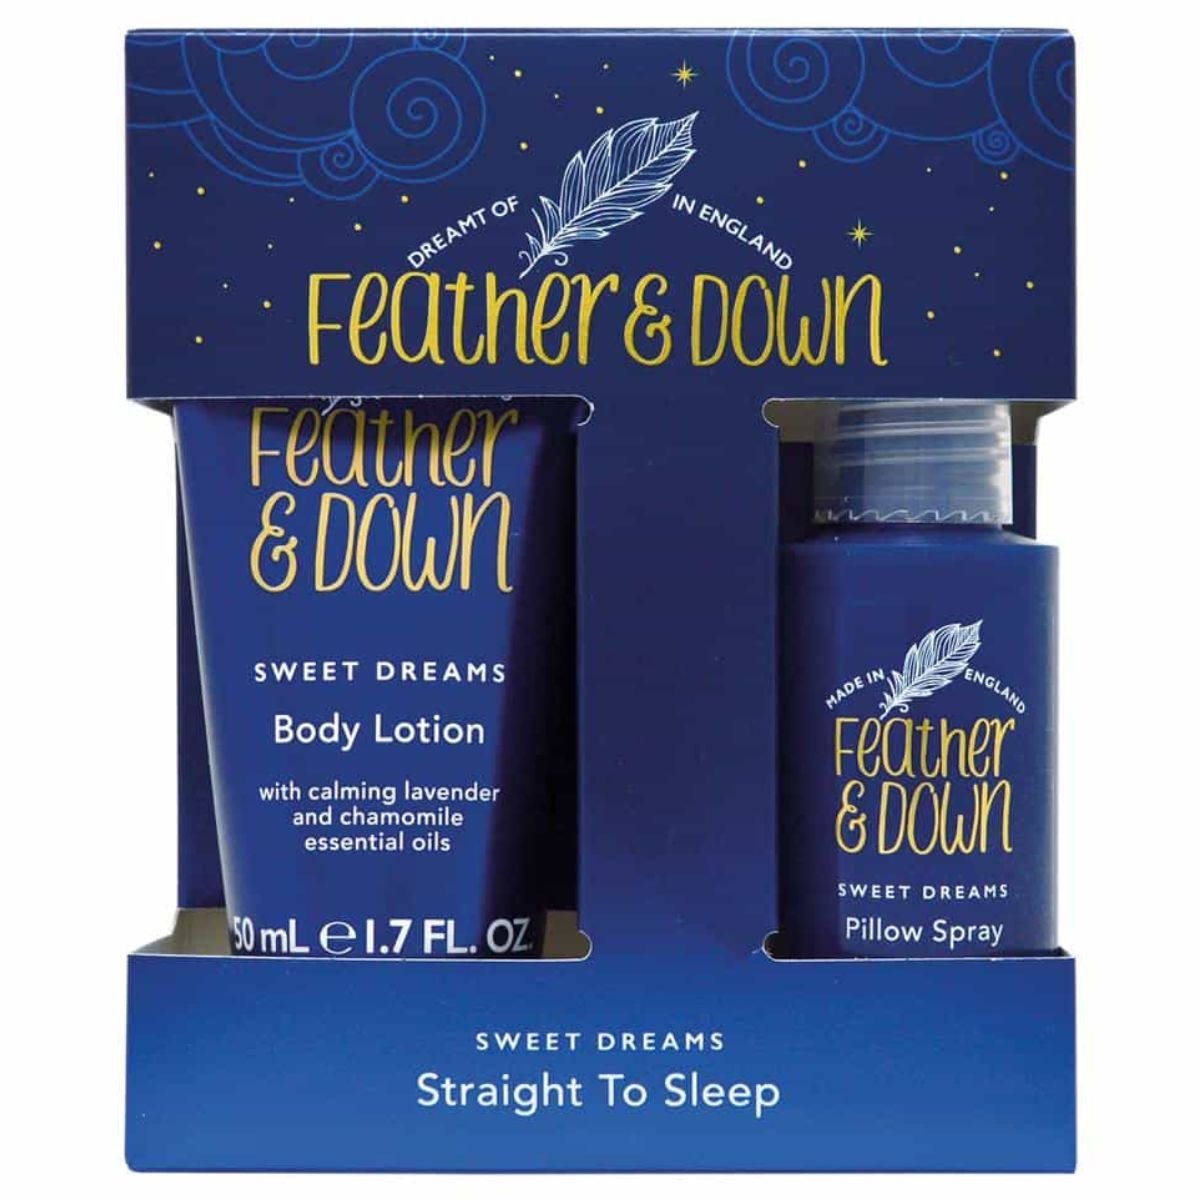 Feather and Down Straight to Sleep Gift Set - 50ml Pillow Spray and 50ml Body Lotion sweet dream body lotion.